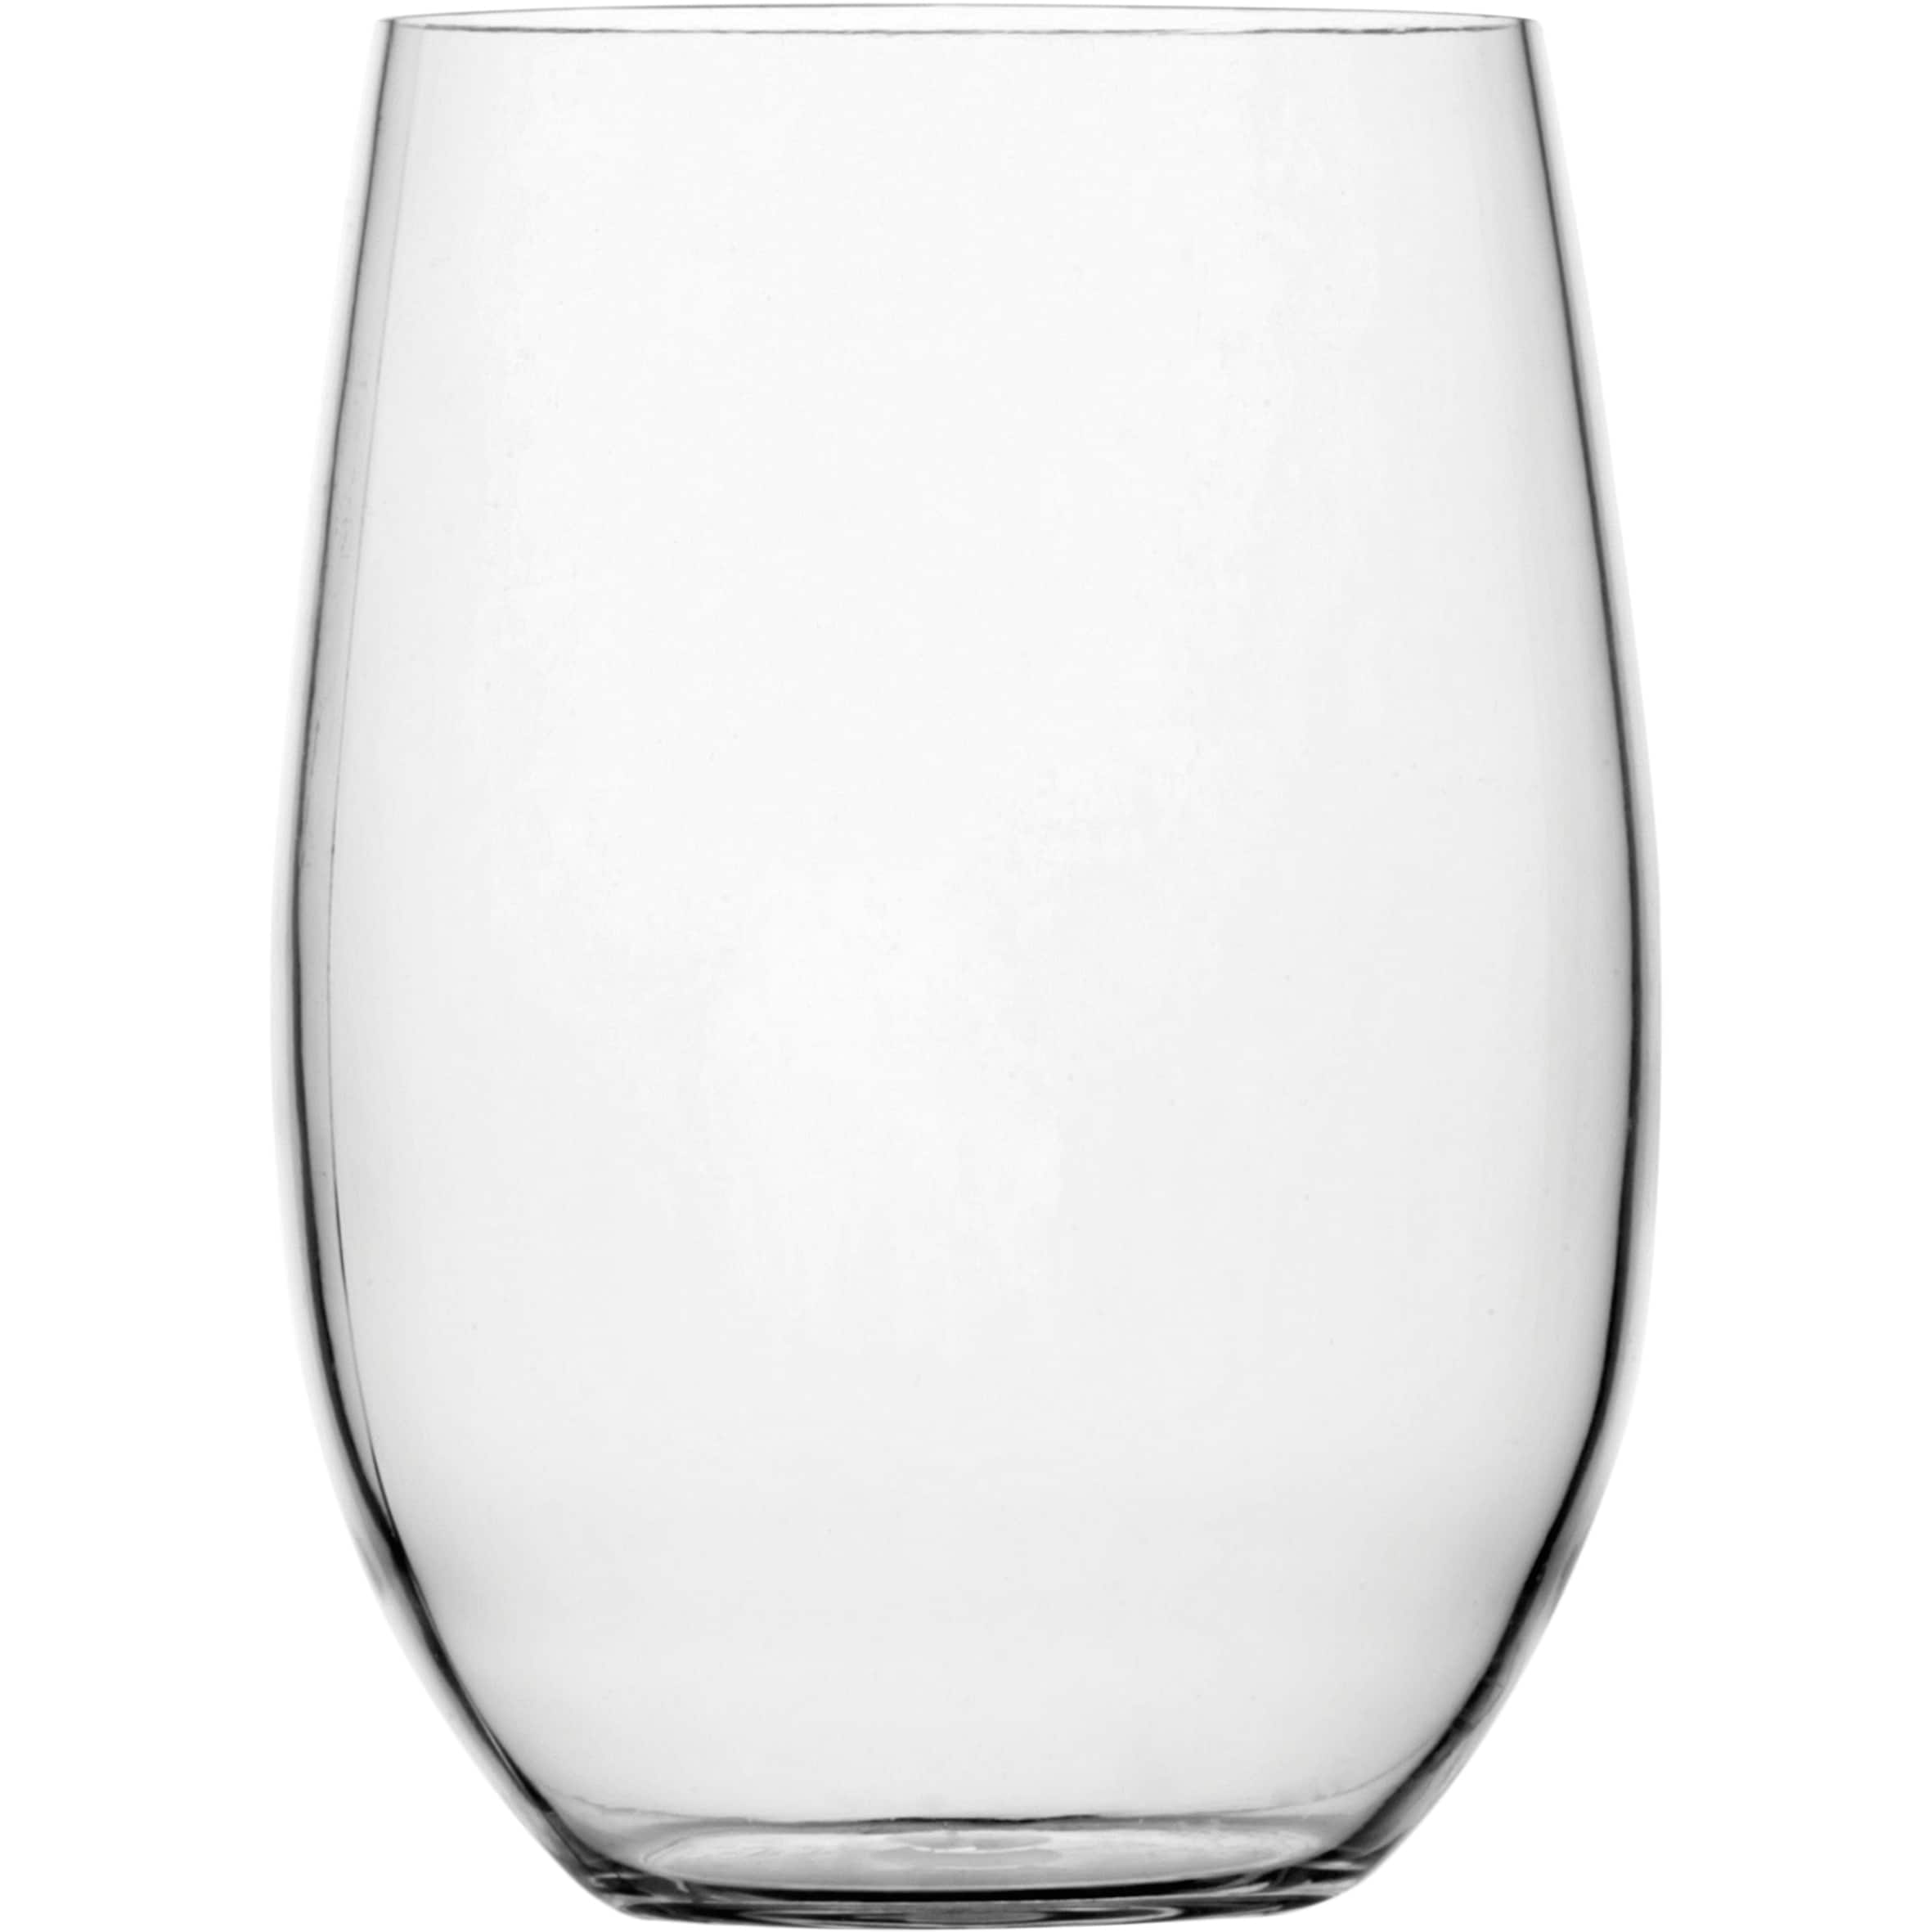 https://ak1.ostkcdn.com/images/products/is/images/direct/7d739ad0321b882f52a5edb9703df9ae7ed0eb3a/Non-Slip-Beverage-Glass---Set-of-6.jpg